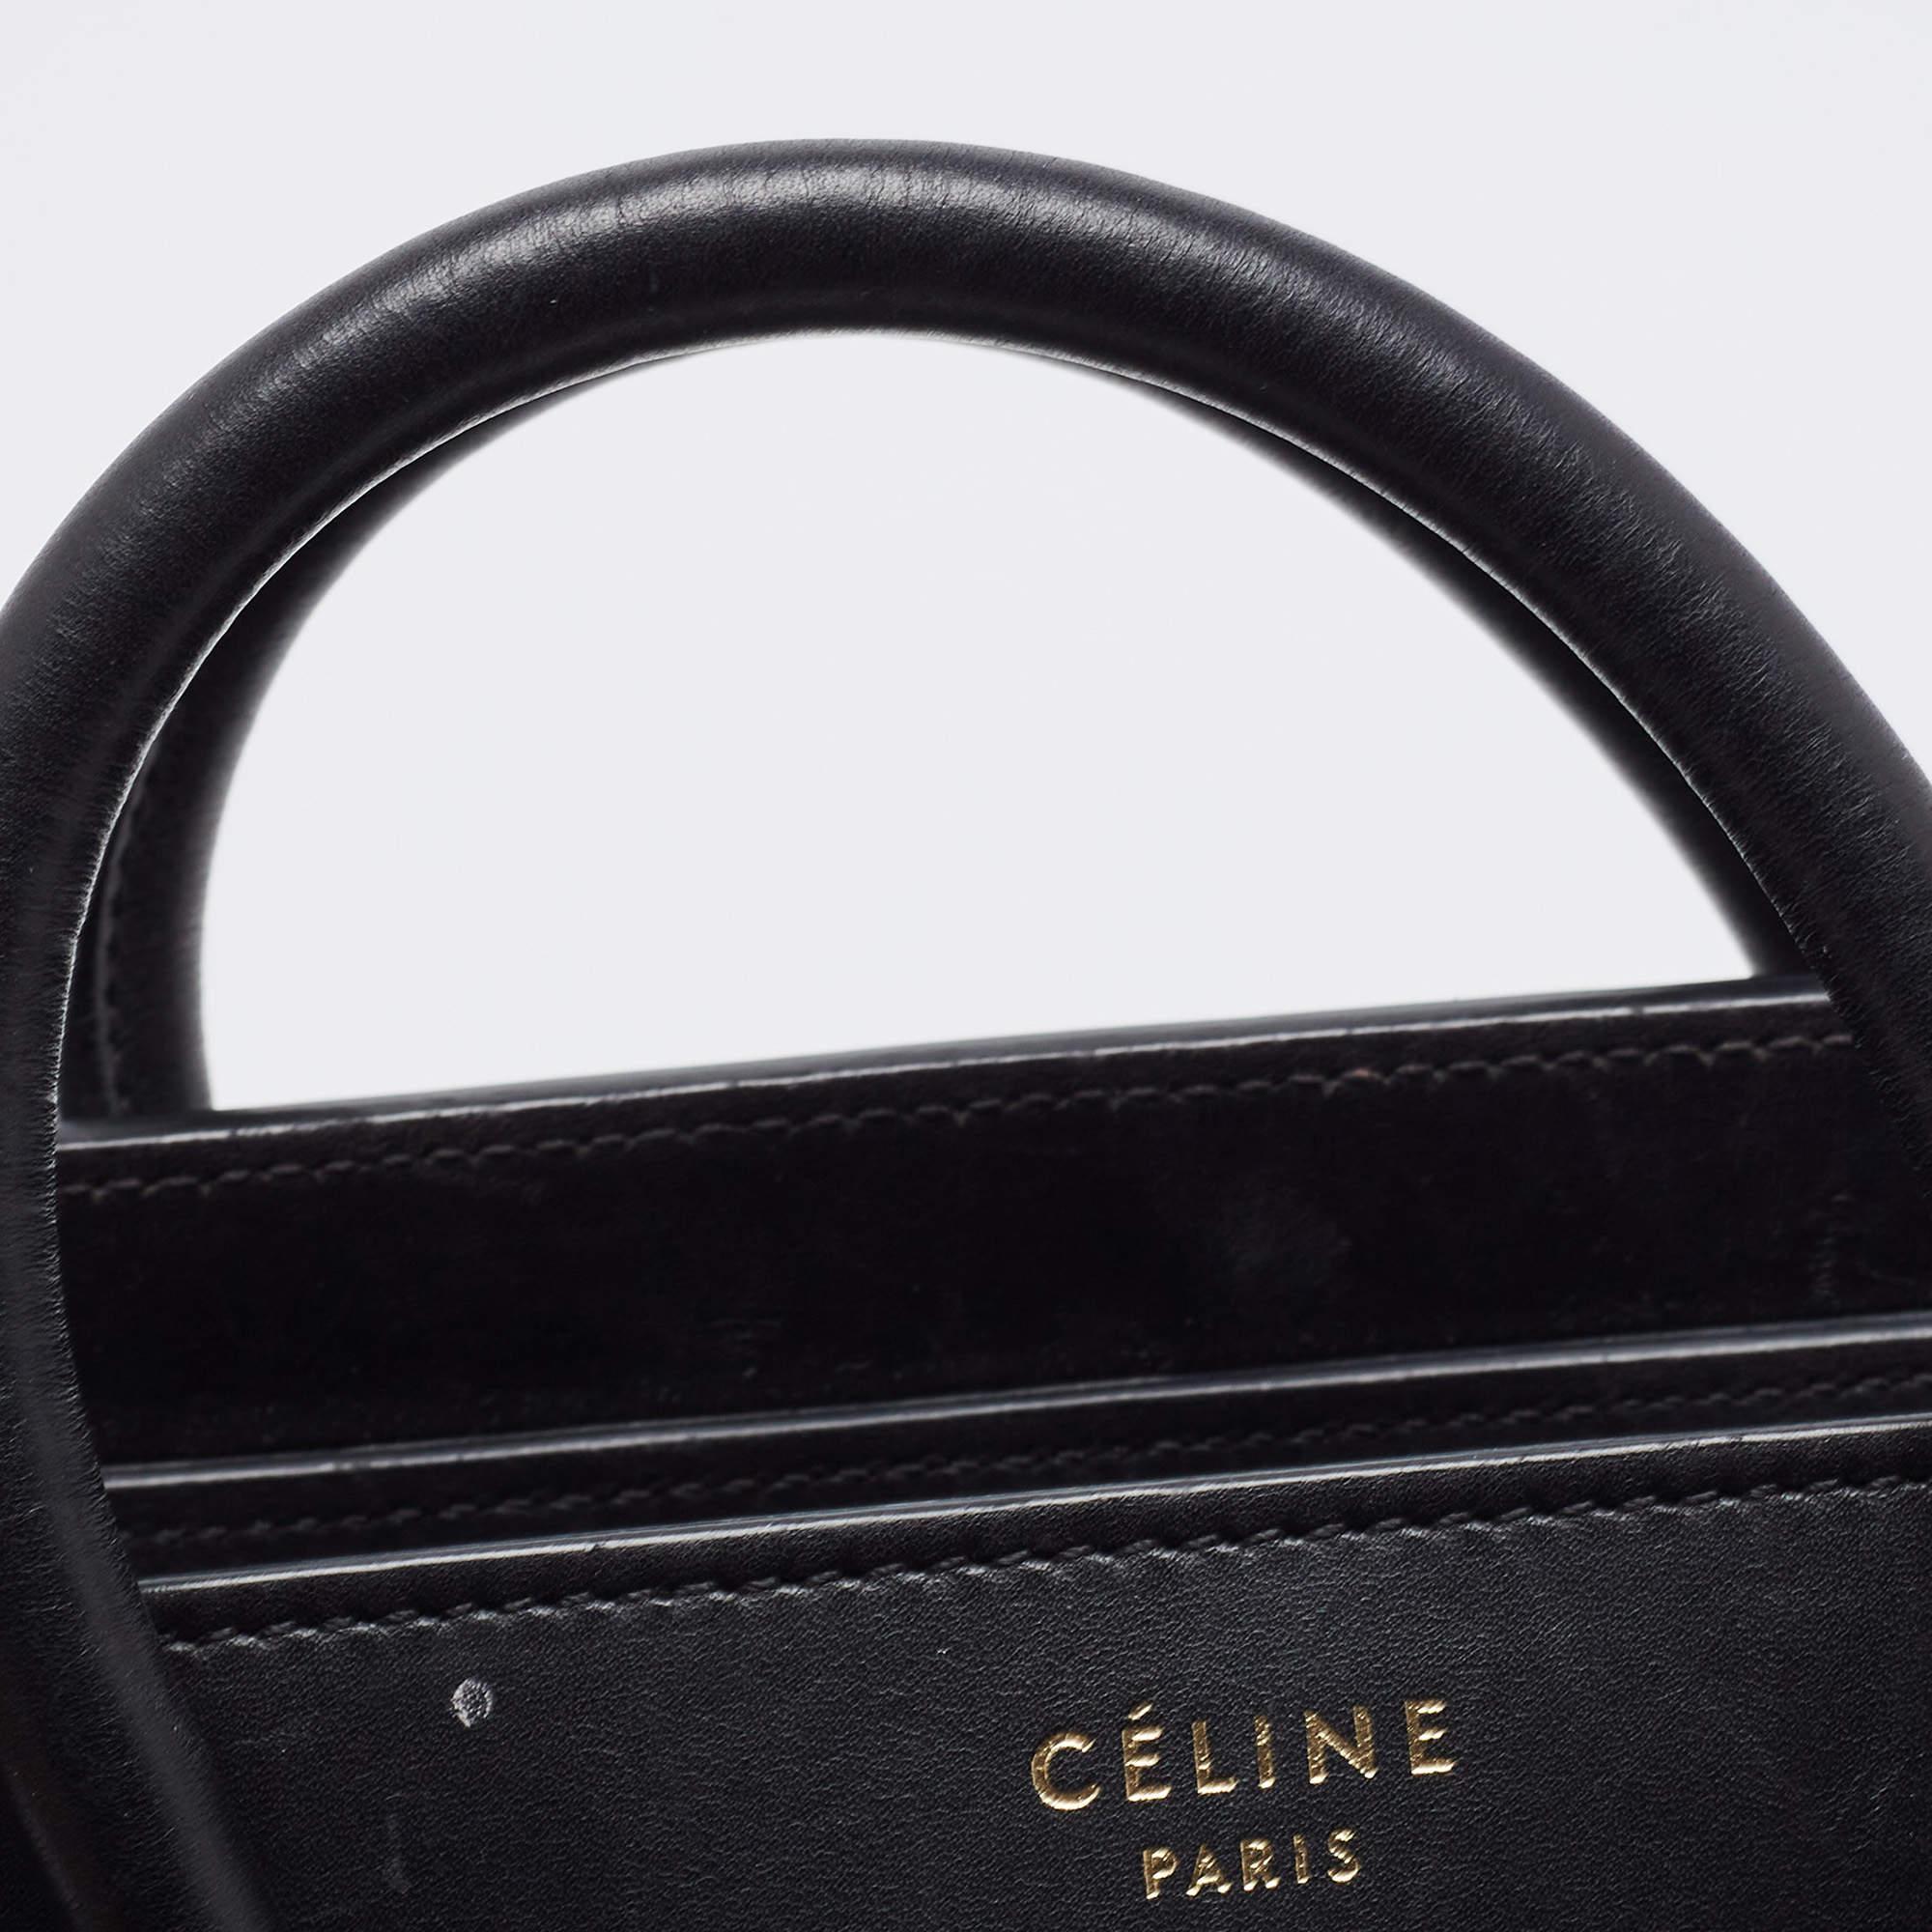 Celine Tricolor Nubuck and Leather Mini Luggage Tote For Sale 4